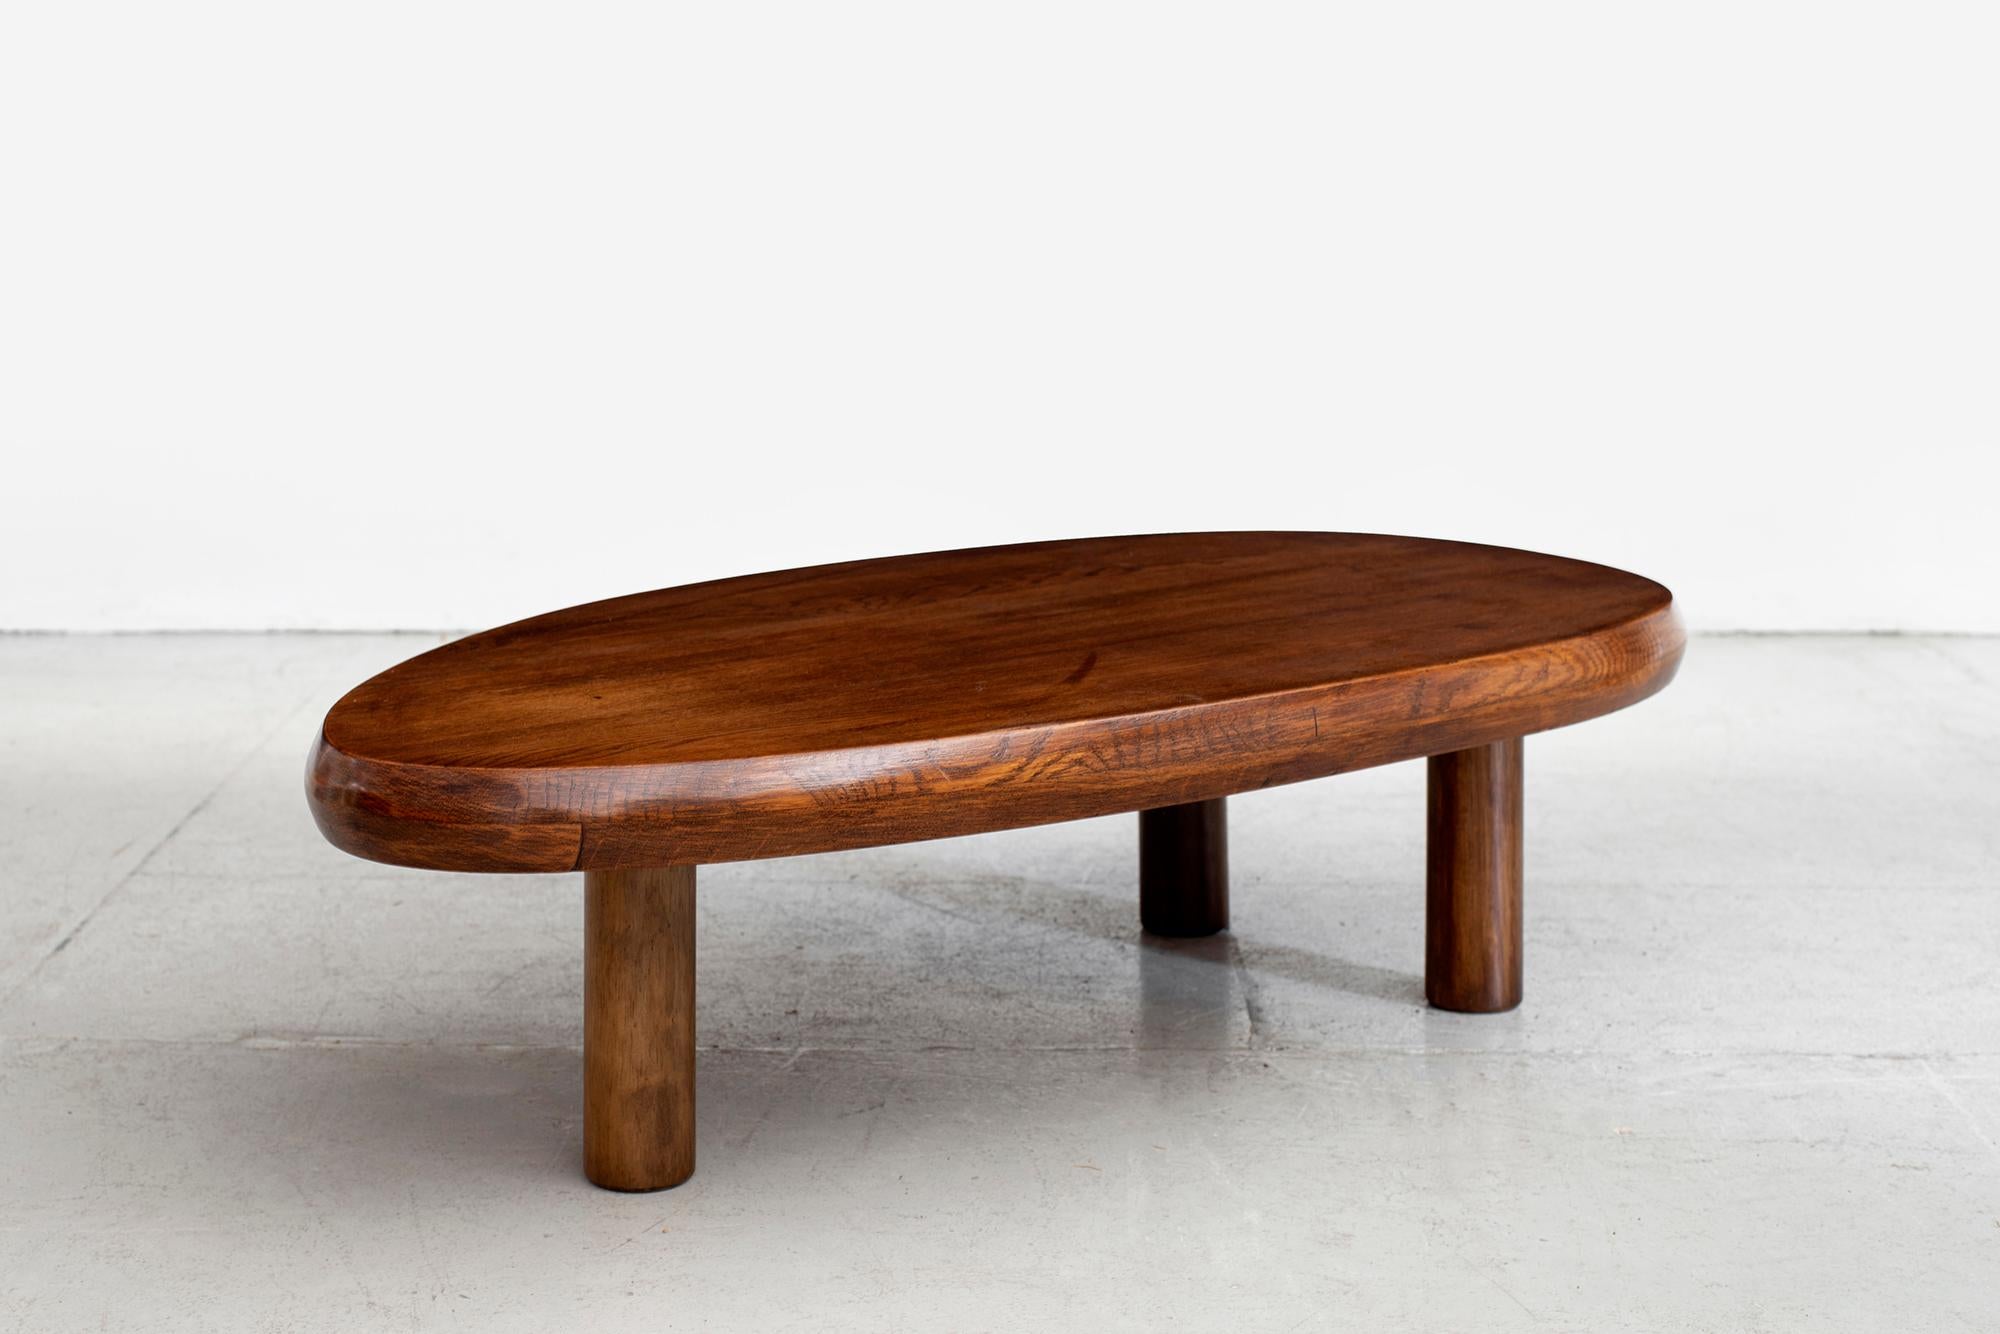 Gorgeous coffee table in the style of Pierre Chapo with 3 legs and freeform organic shape.
Incredible gain and wood joinery.
France, 1950s.